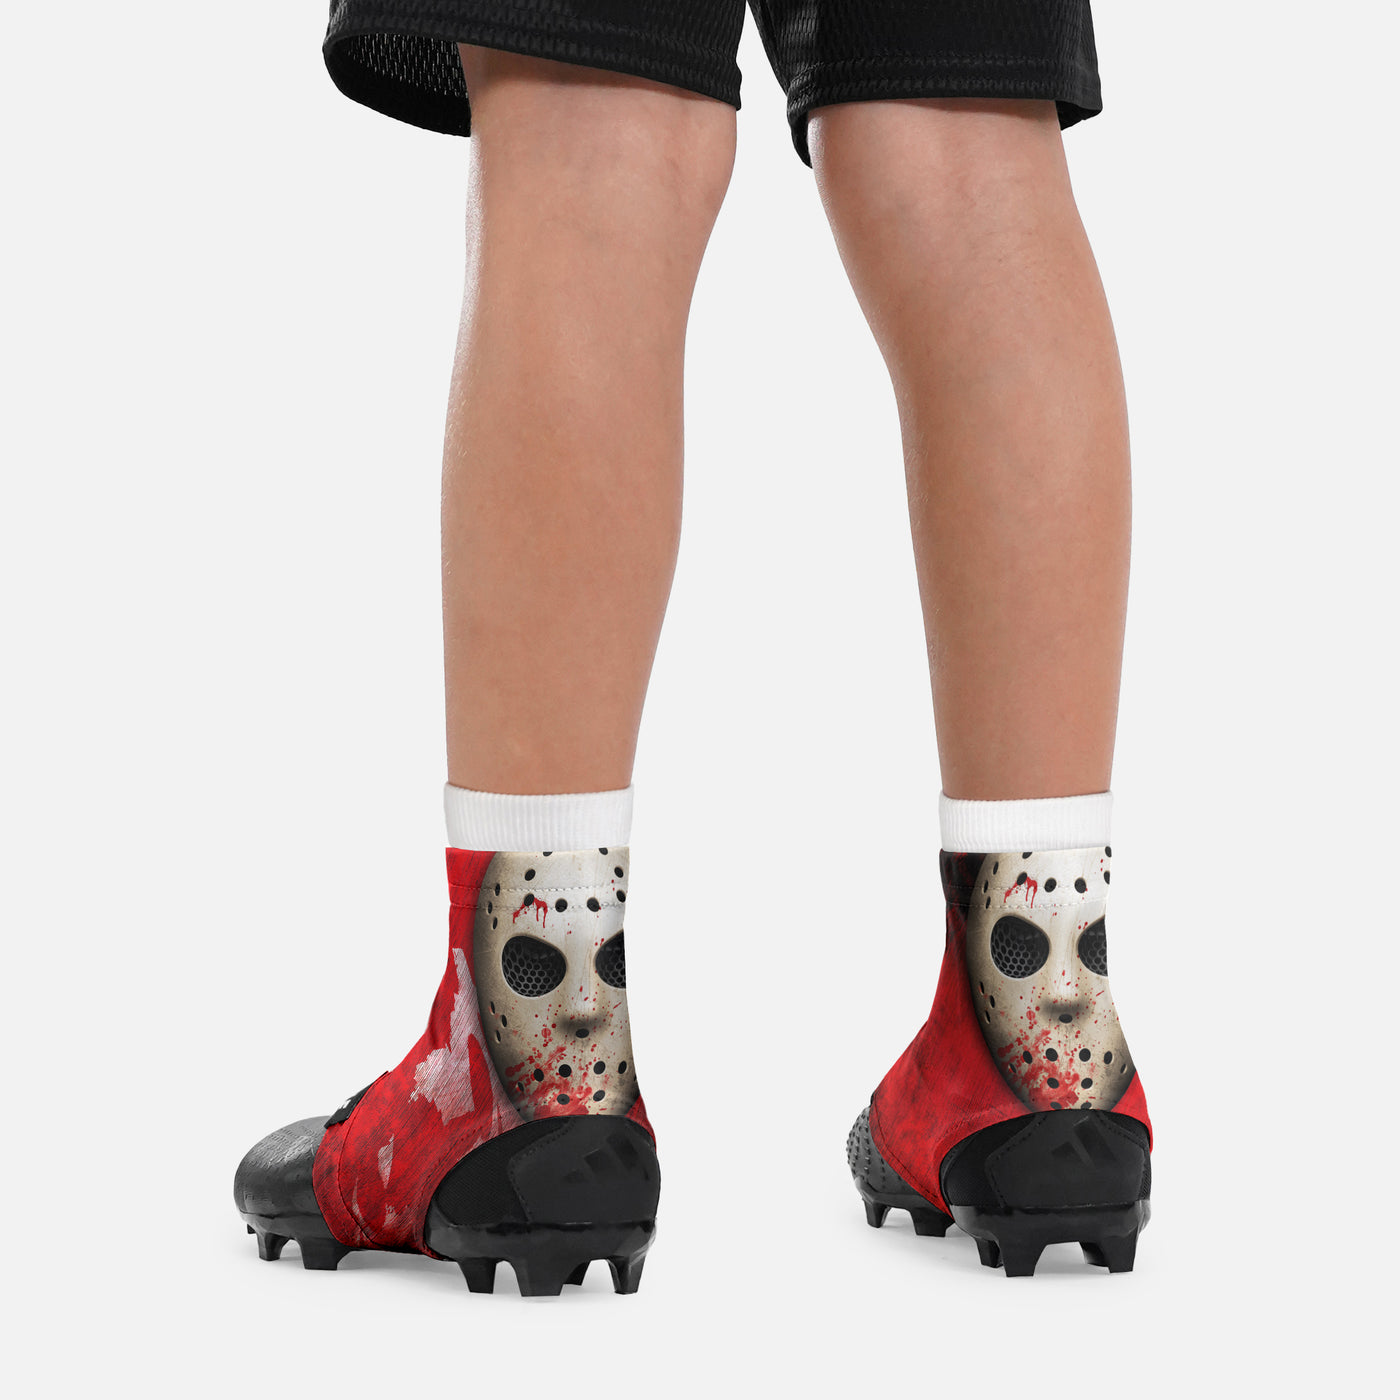 Hockey Mask Kids Spats / Cleat Covers